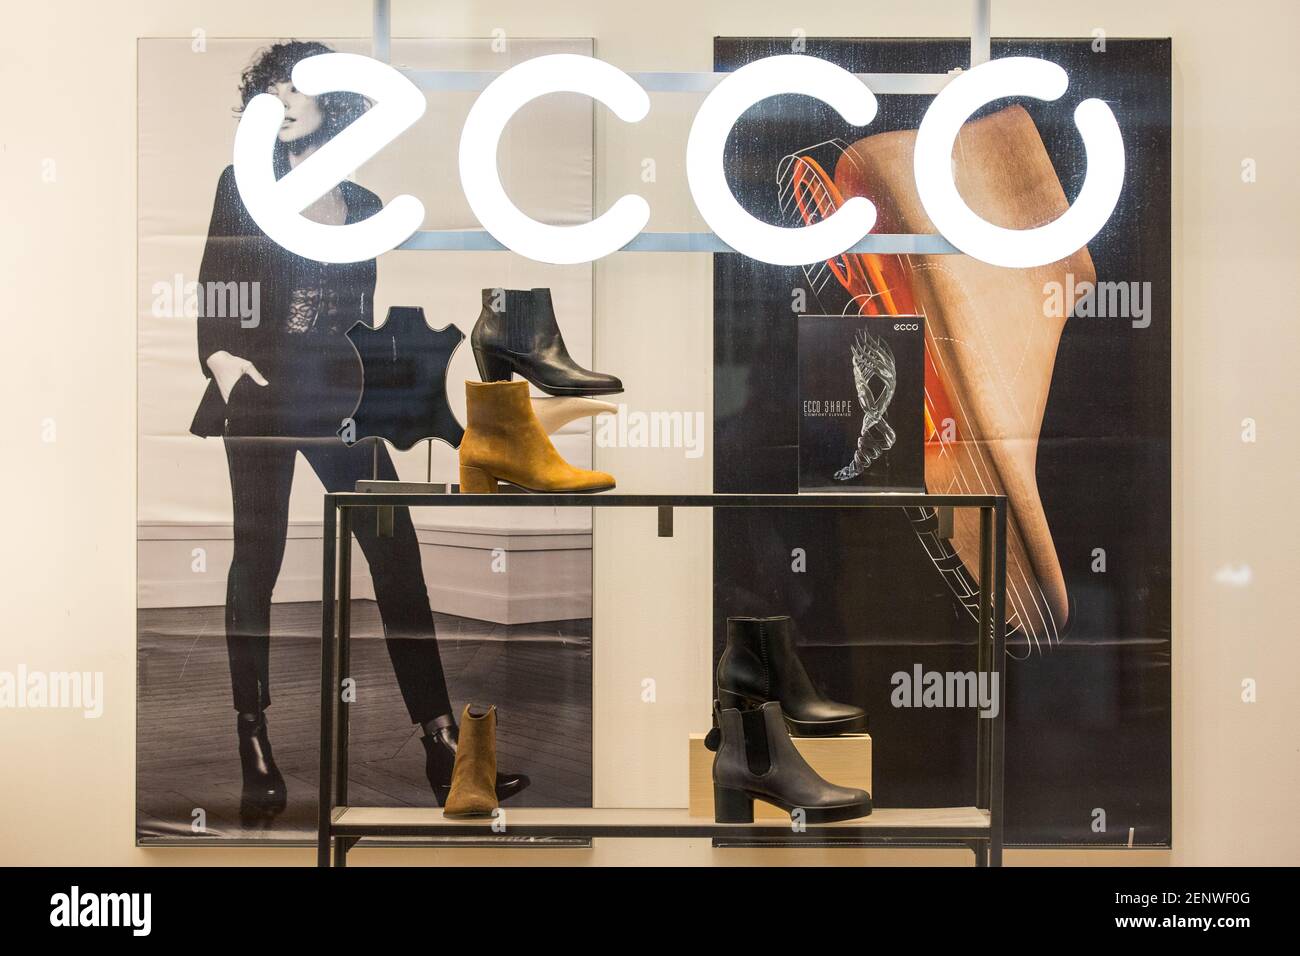 Danish shoe manufacturer and retailer founded in 1963 by Karl Toosbuy, Ecco  logo seen in Gothenburg Stock Photo - Alamy